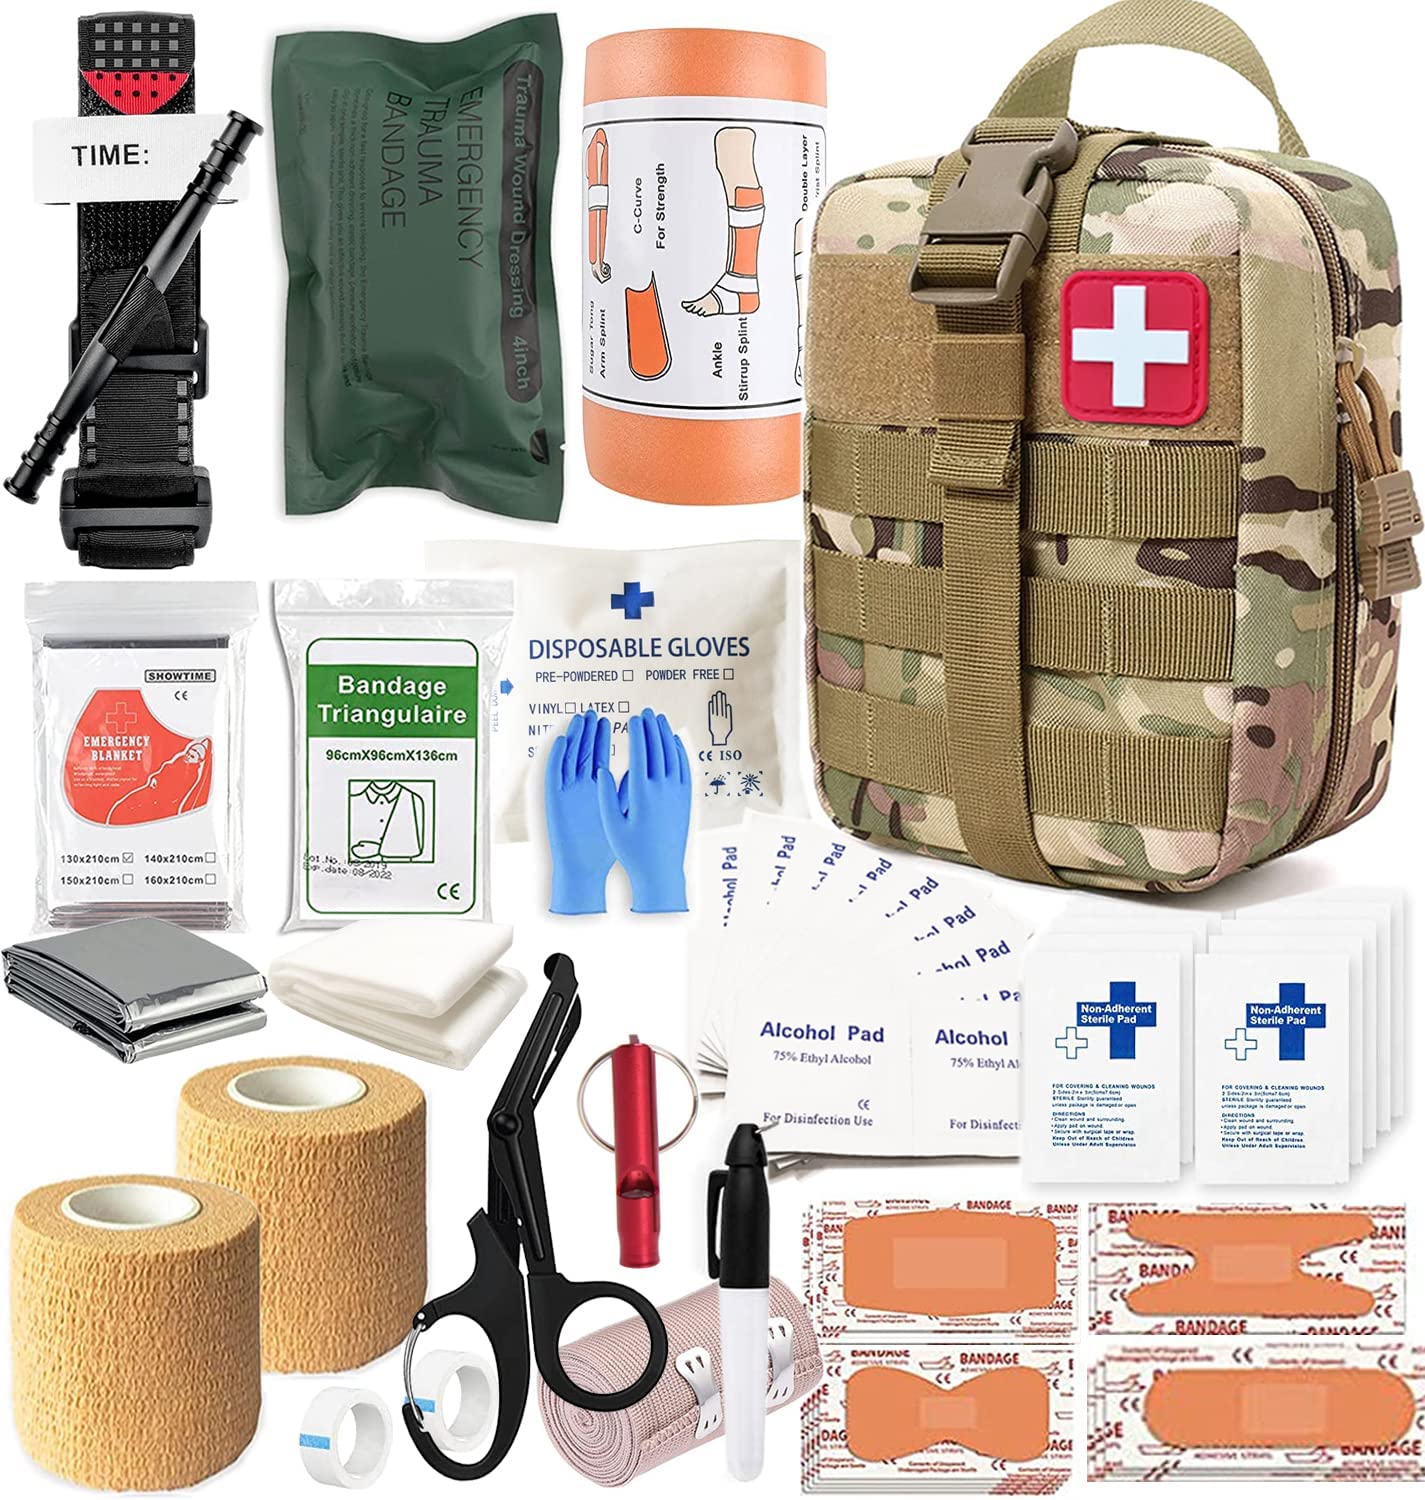 IFAK Kit, Trauma Kit Military Medical First Aid Kits with Tourniquet, Emergency Survival Bug Out Bag for Camping Gear Supplies Hiking (Camouflage)